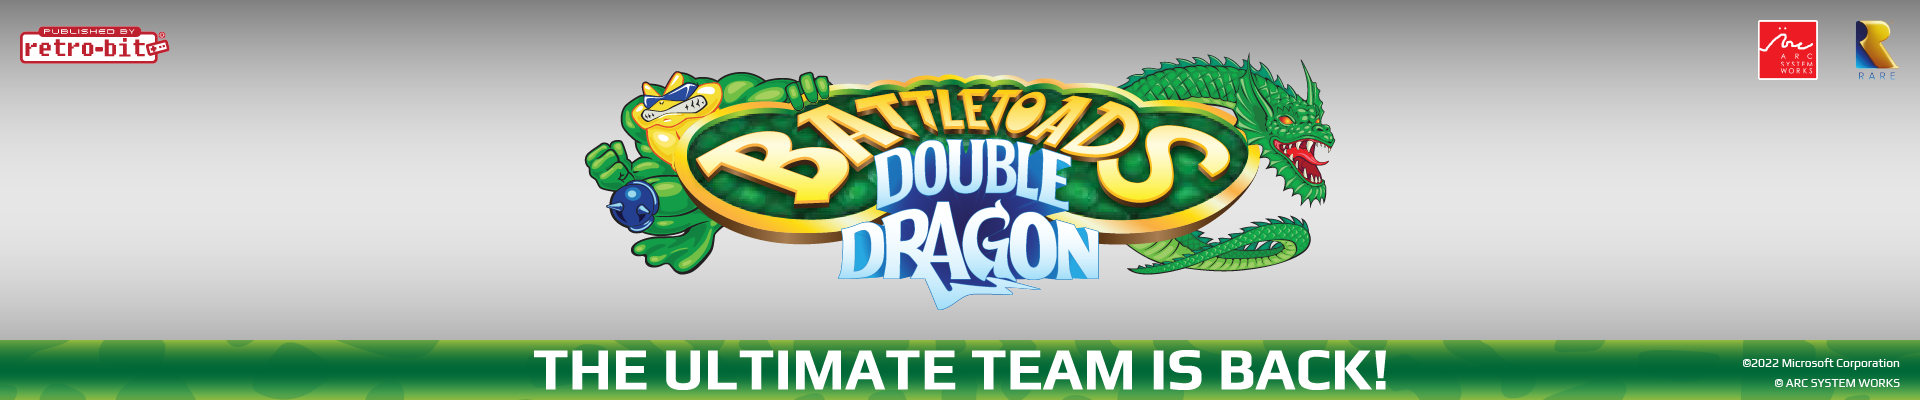 Battletoads & Double Dragon: The Ultimate Team for NES